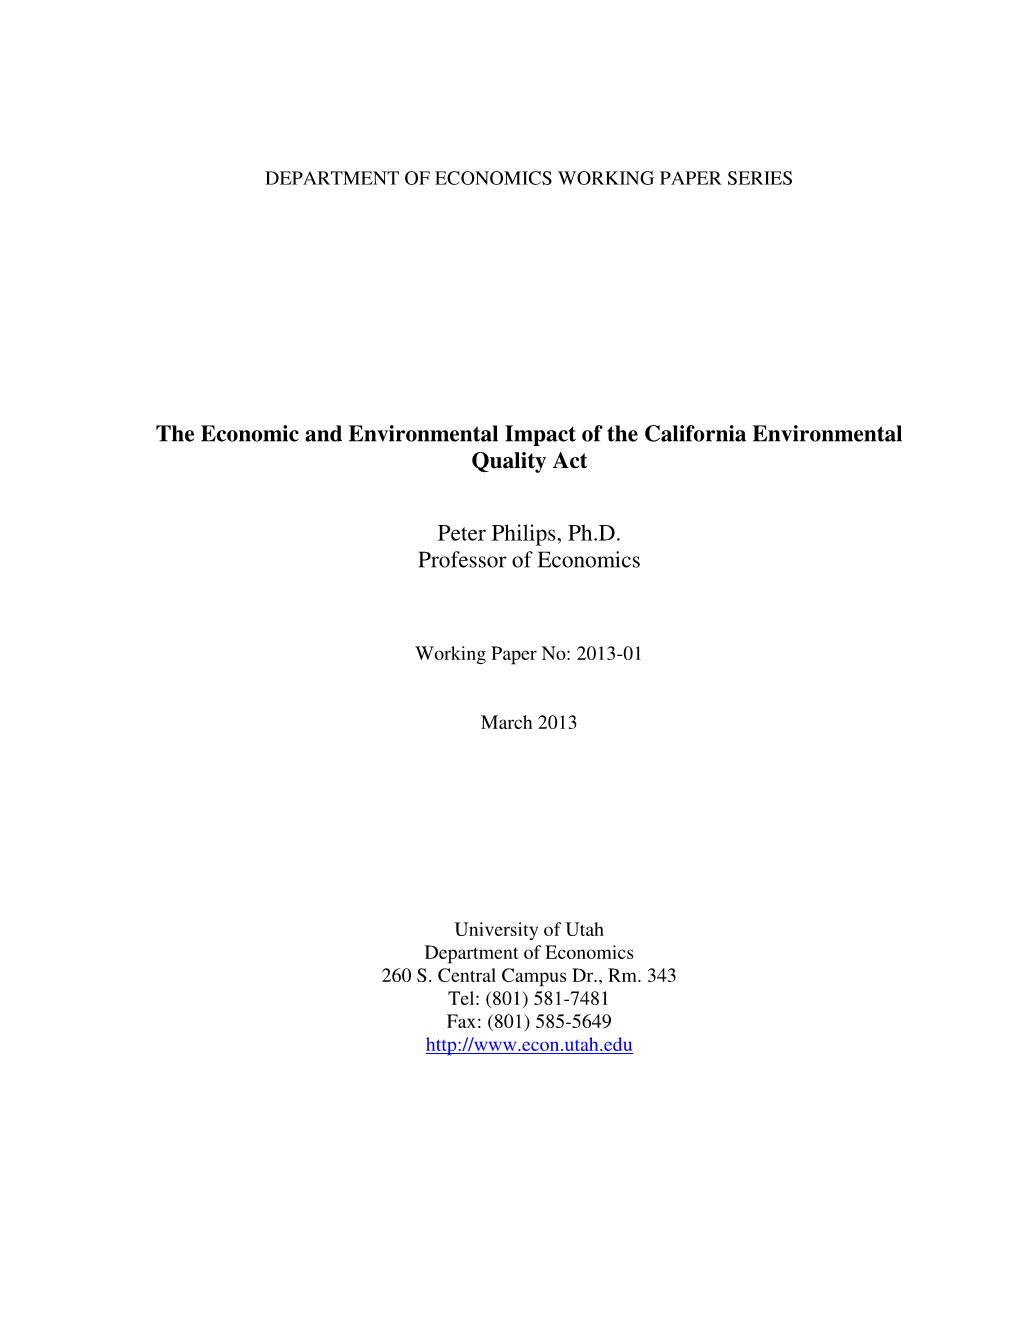 The Economic and Environmental Impact of the California Environmental Quality Act